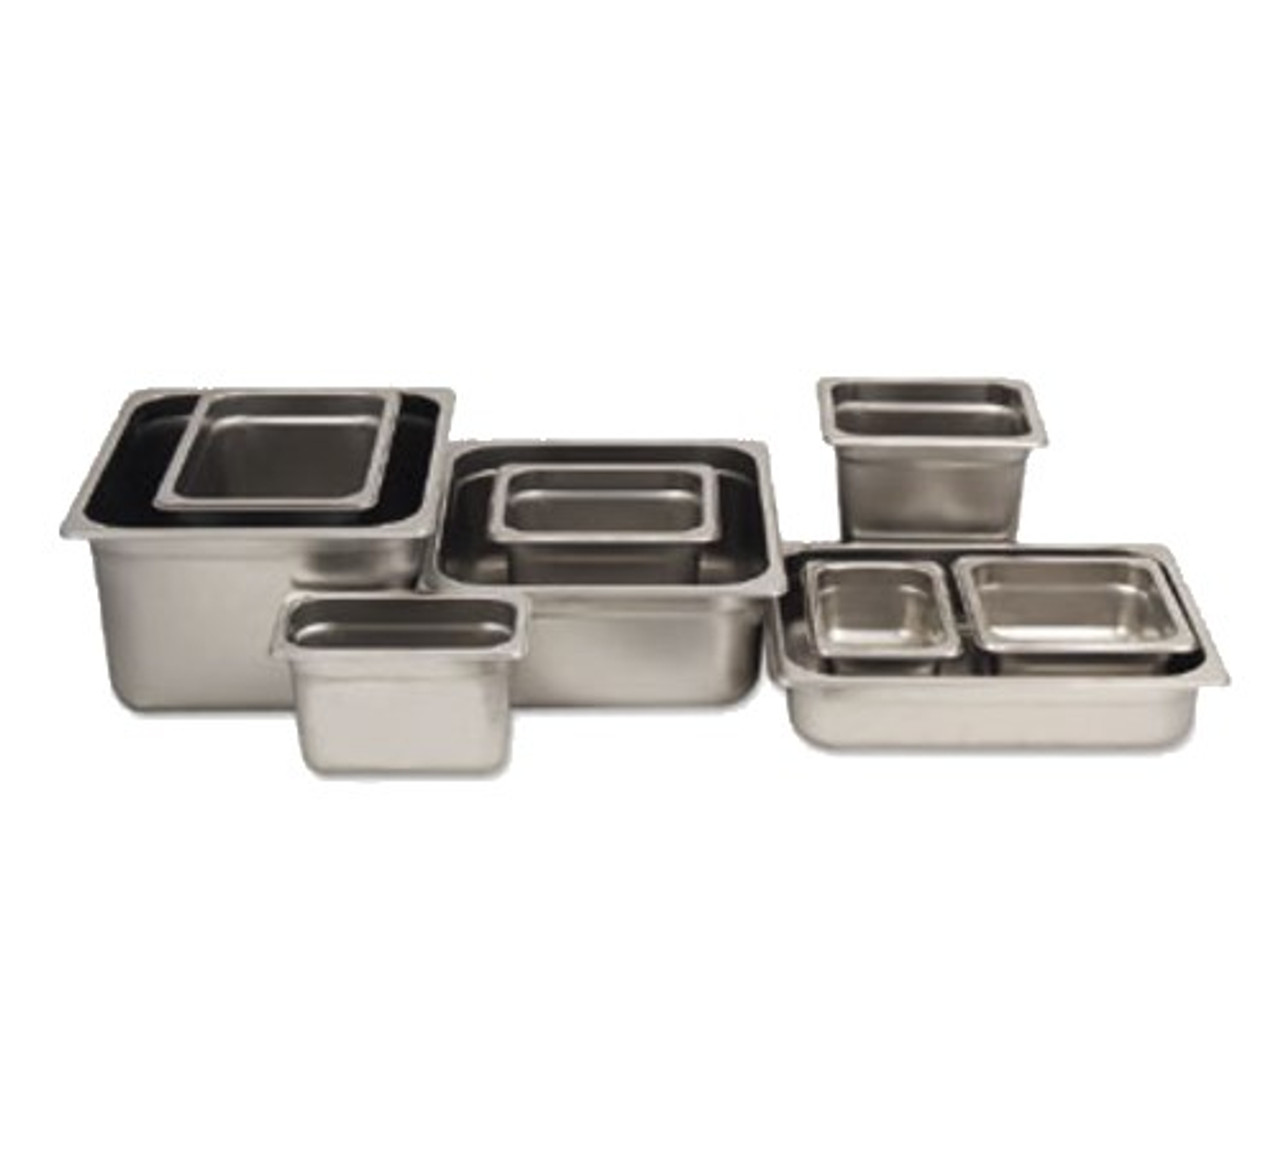 Rest-Rite™ E™ Economy Steam Table Pan, full size, 8-1/2 qt., 20-3/4" x 12-3/4" x 2-1/2" deep, anti-jamming, 25 gauge stainless steel, NSF